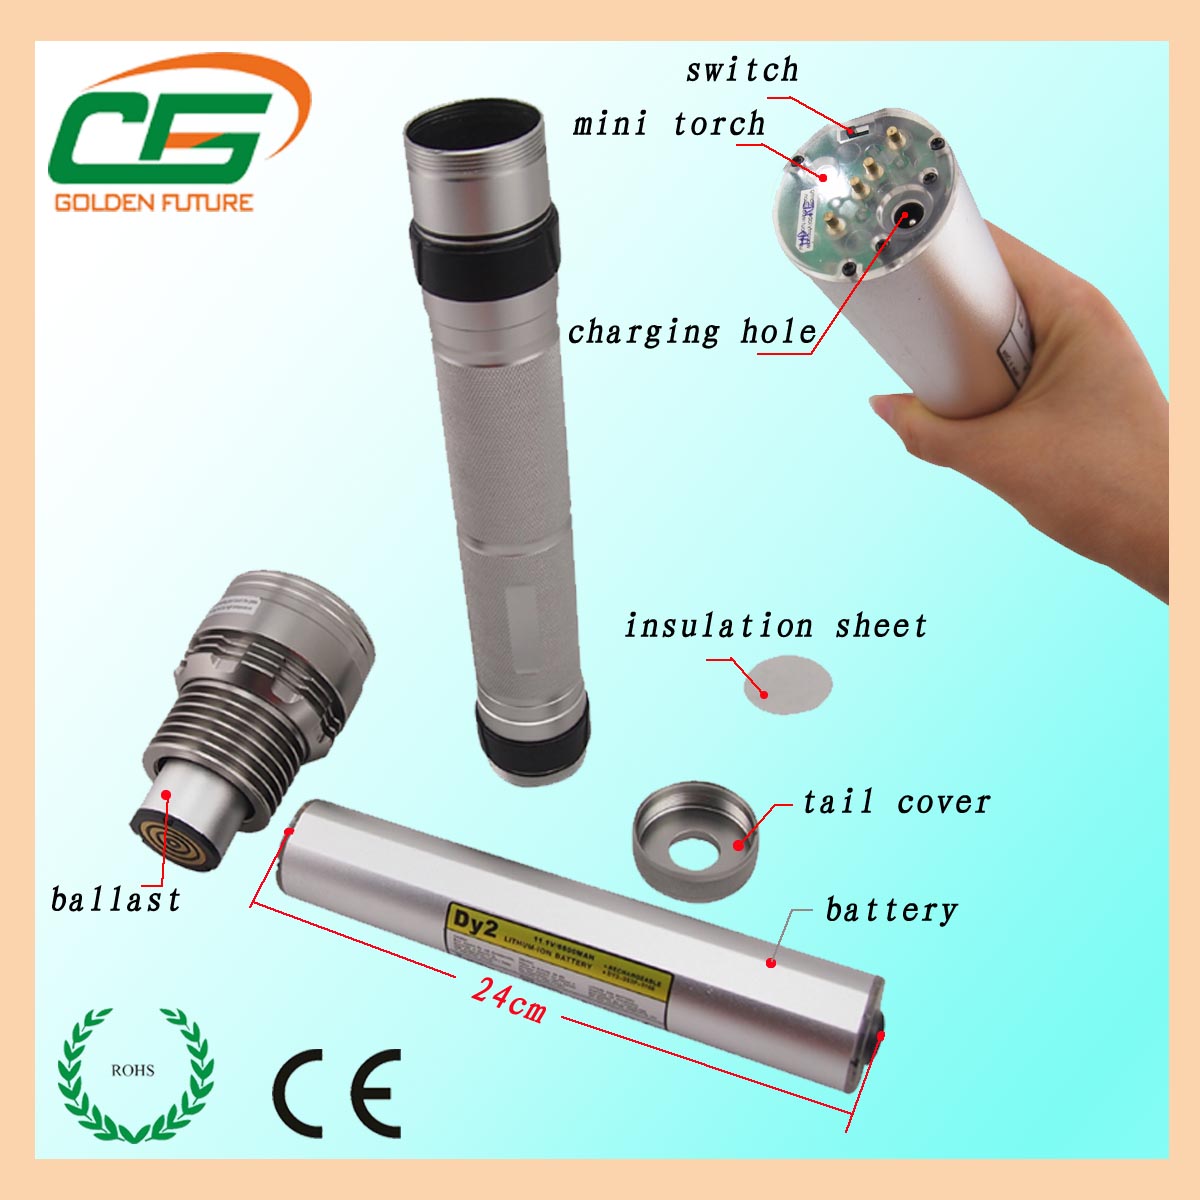 75w rechargeable flashlight